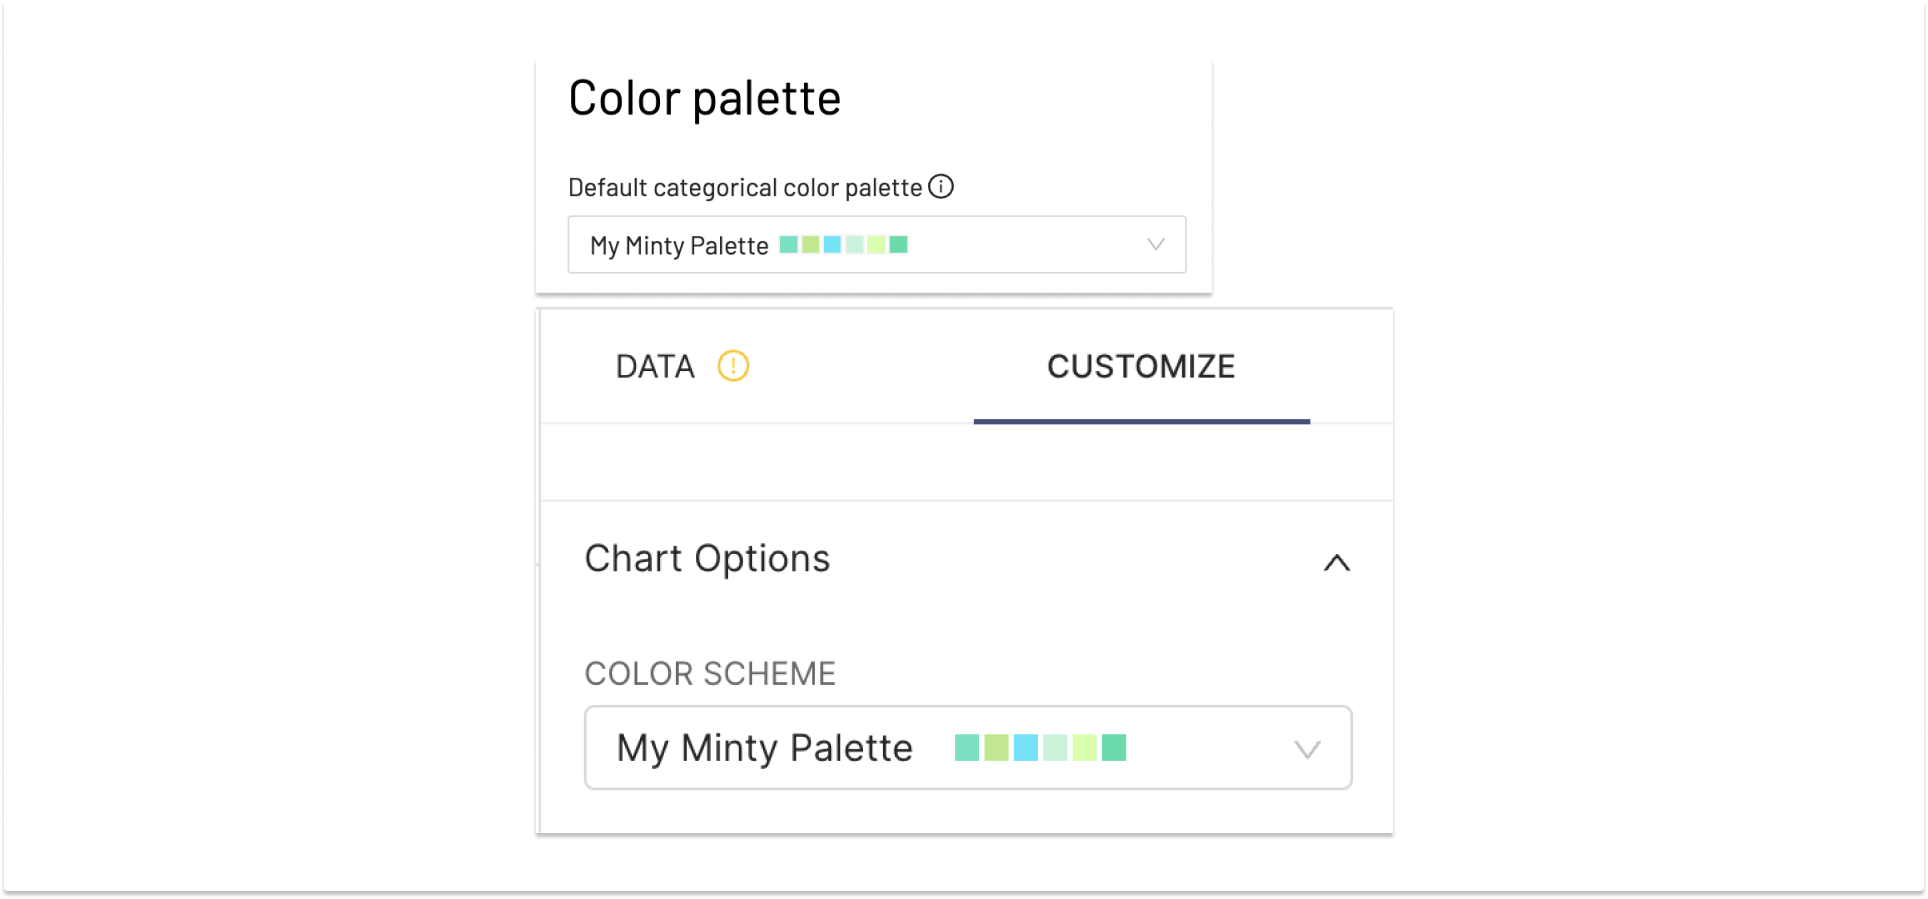 Categorical color palette added and available in menus